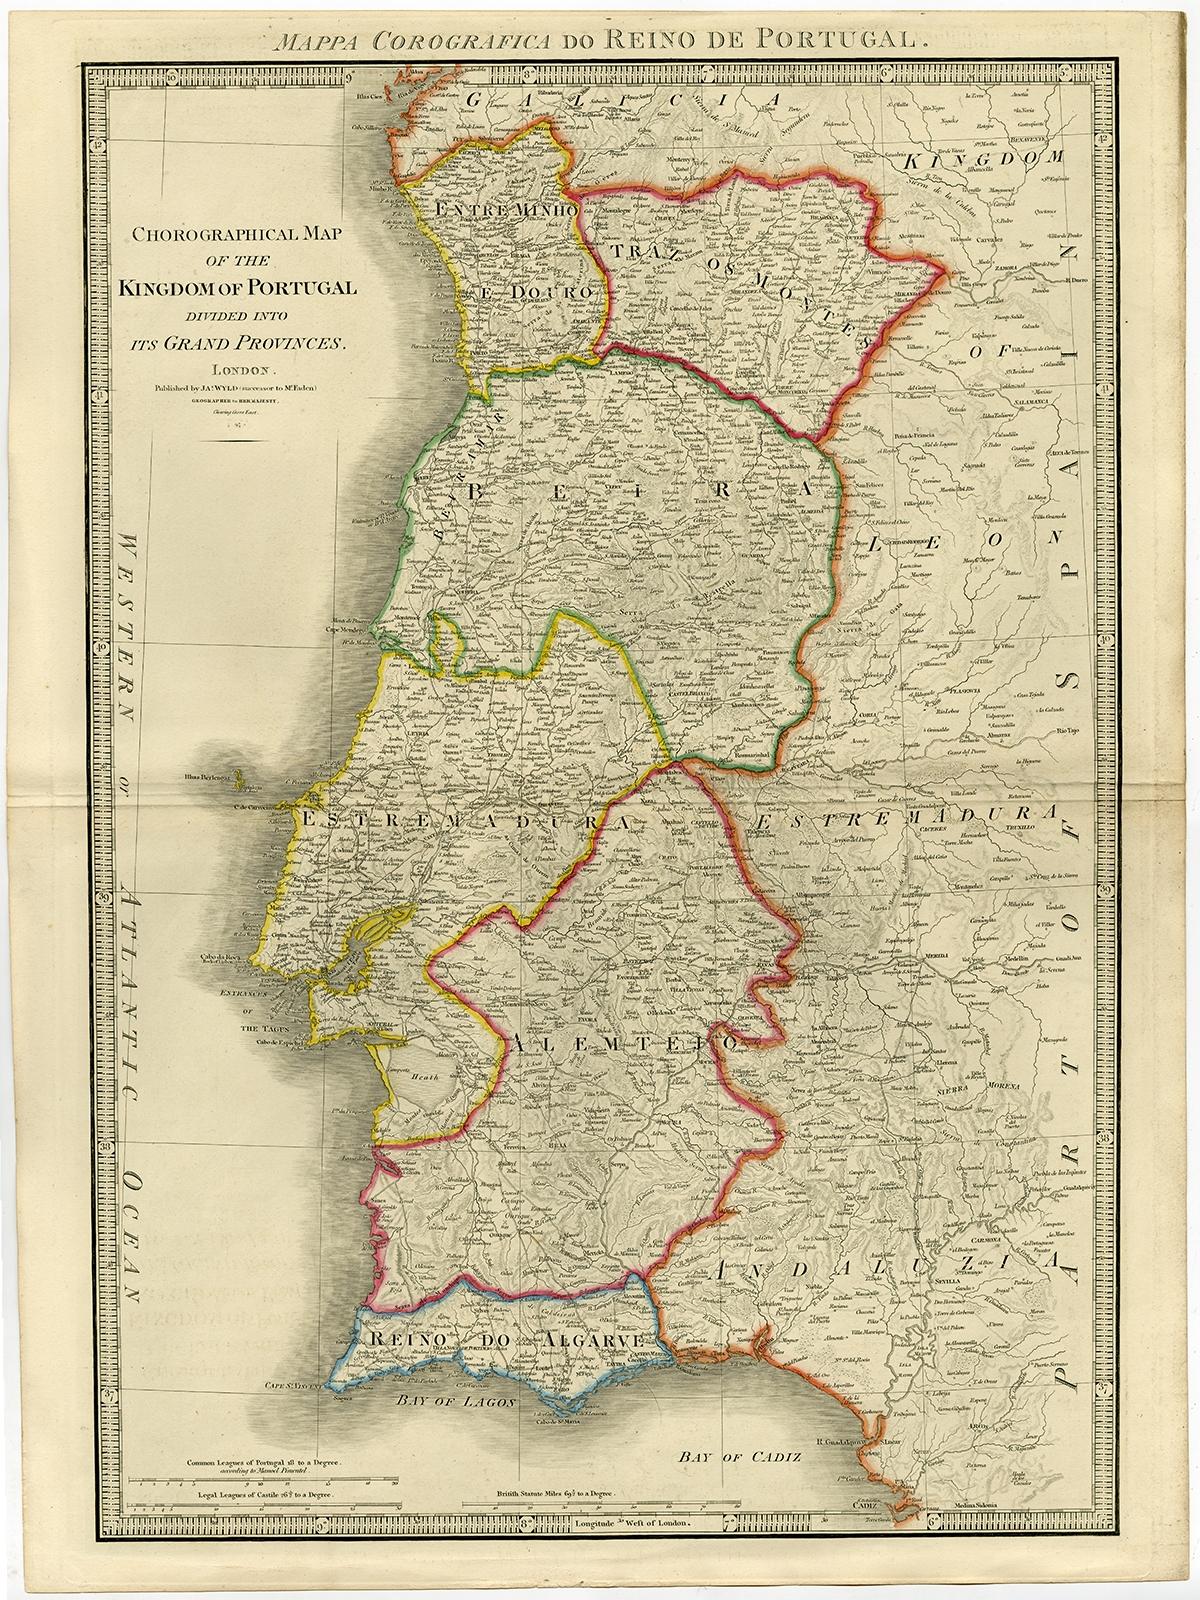 Antique map titled 'Mappa Corografica do Reino de Portugal - Chorographical map of the Kingdom of Portugal divided into its Grand Provinces.' 

Large map of the Kingdom of Portugal. From James Wyld's 'A New General Atlas of Modern Geography.',